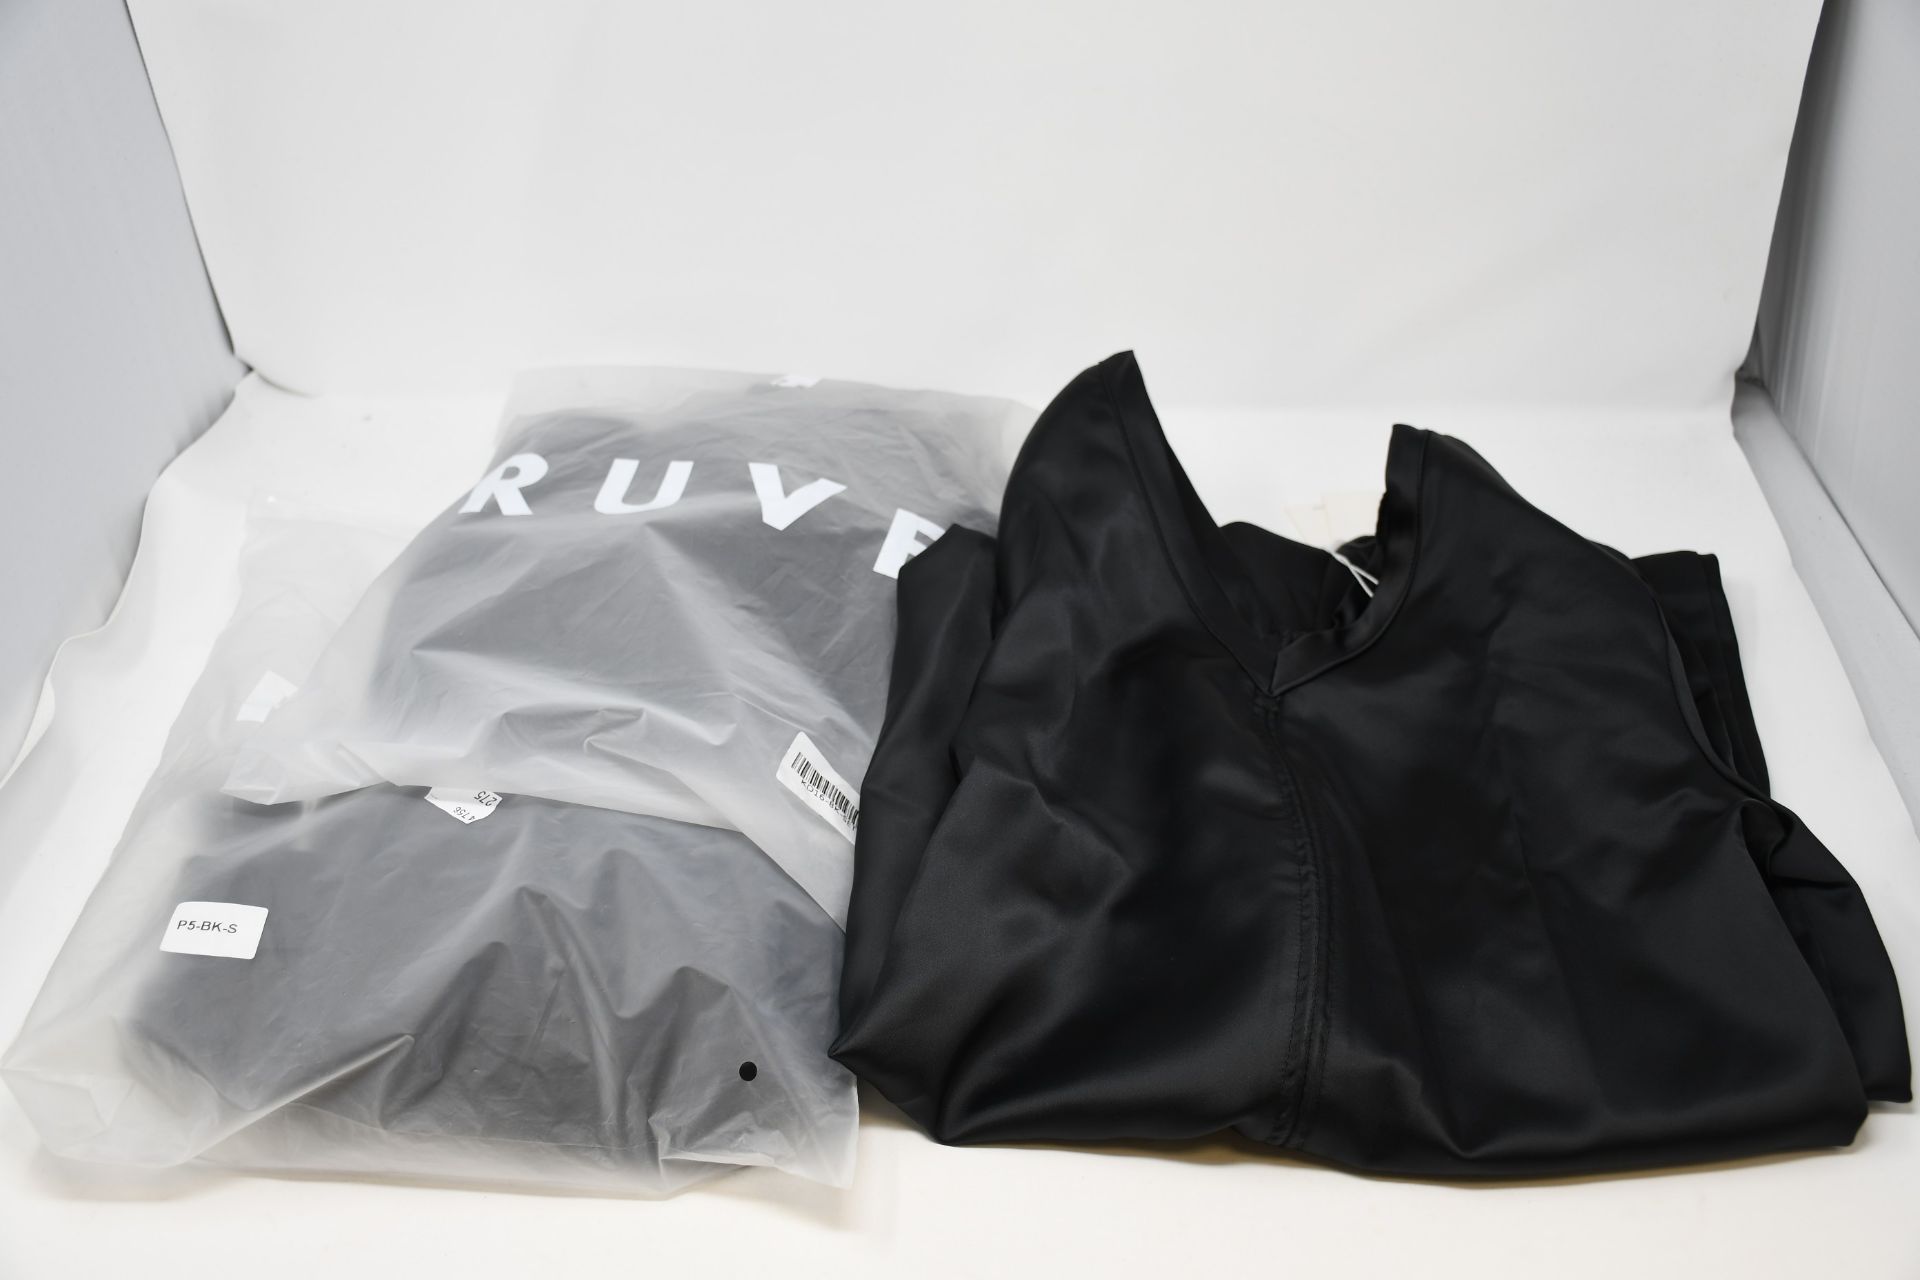 One as new Ruve LOE pants (size unknown). One as new Ruve Shera Dress. One as new Ruve black dress.